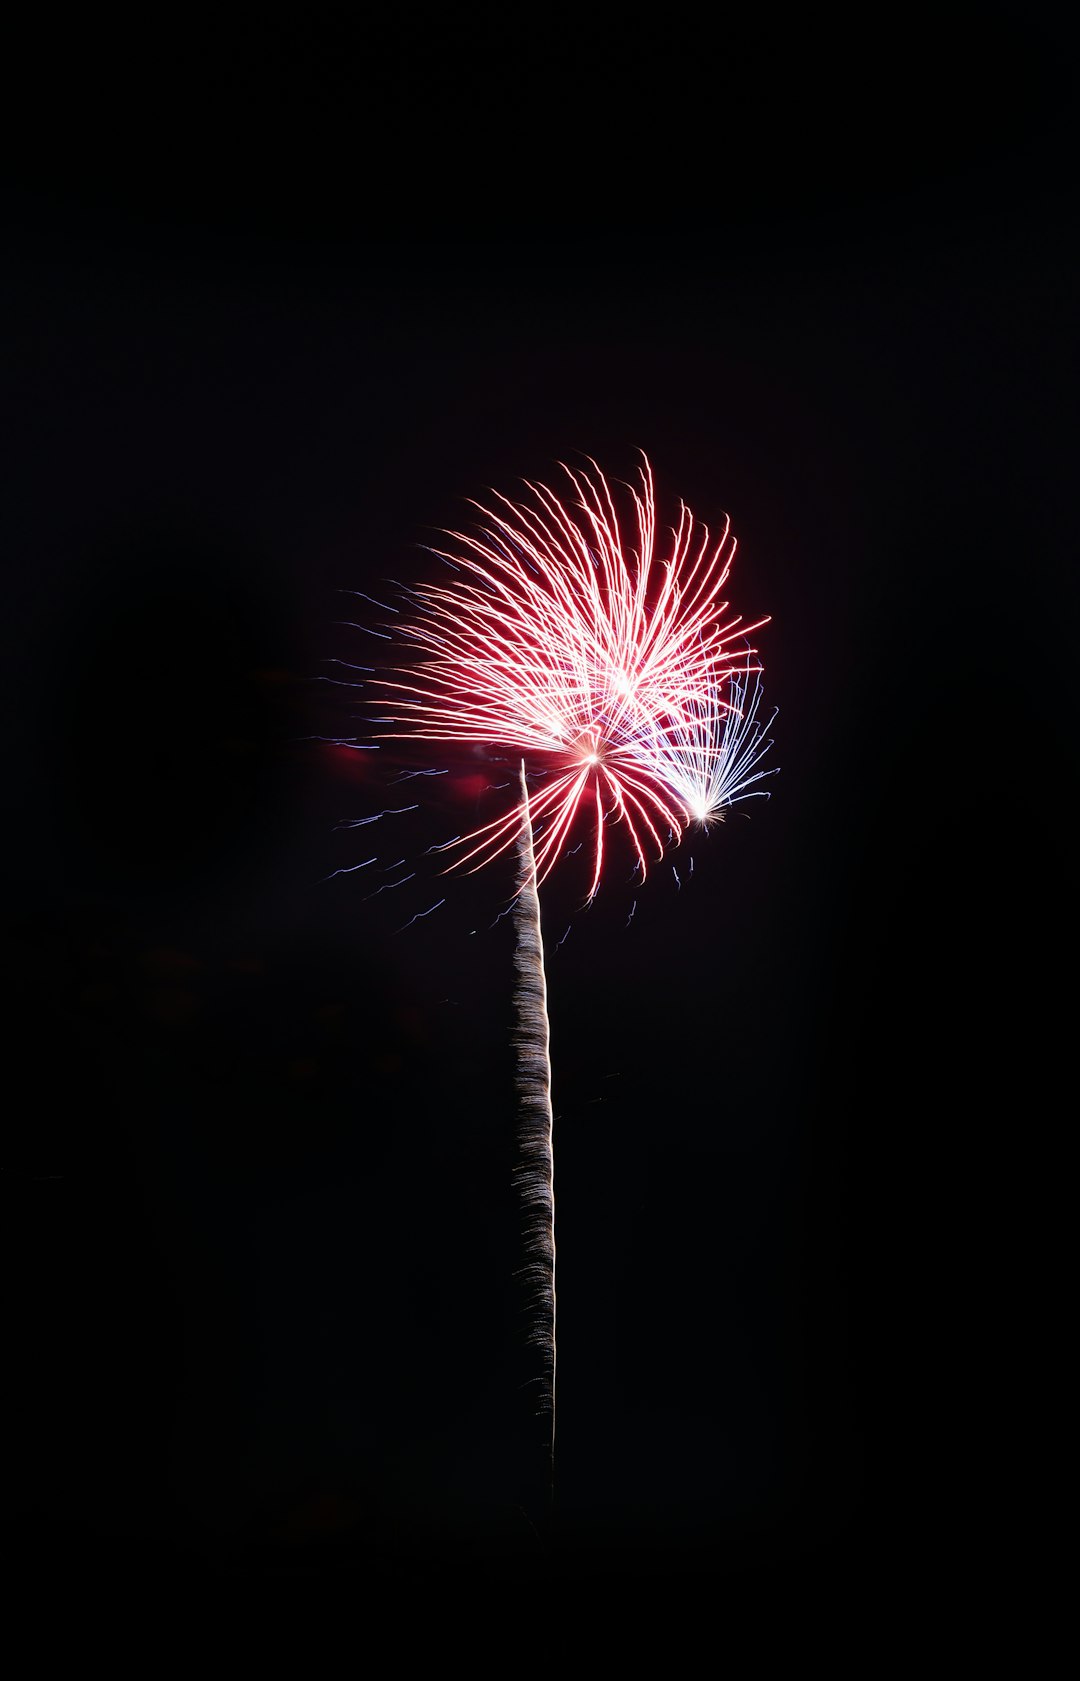 red and white fireworks in dark sky